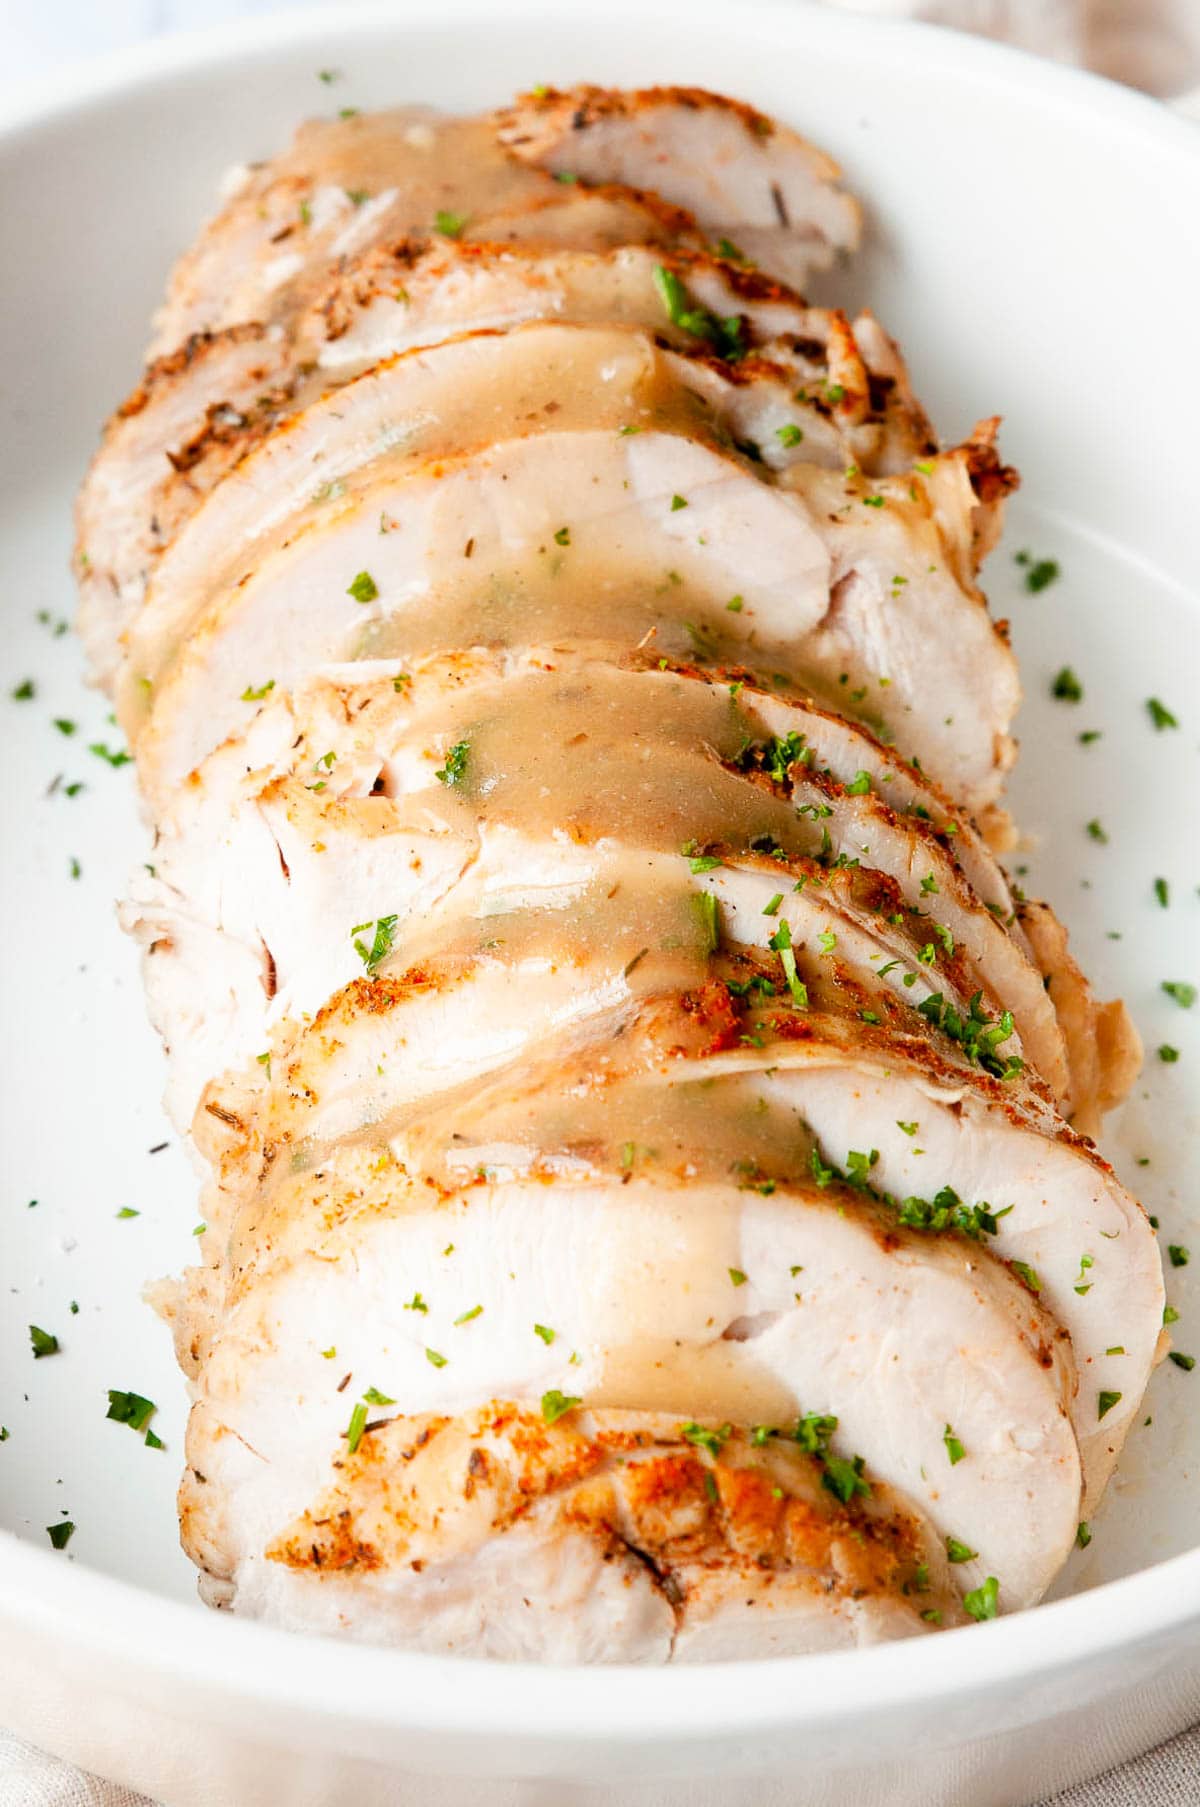 Cooked and sliced boneless turkey breast with gravy and parsley on white plate.